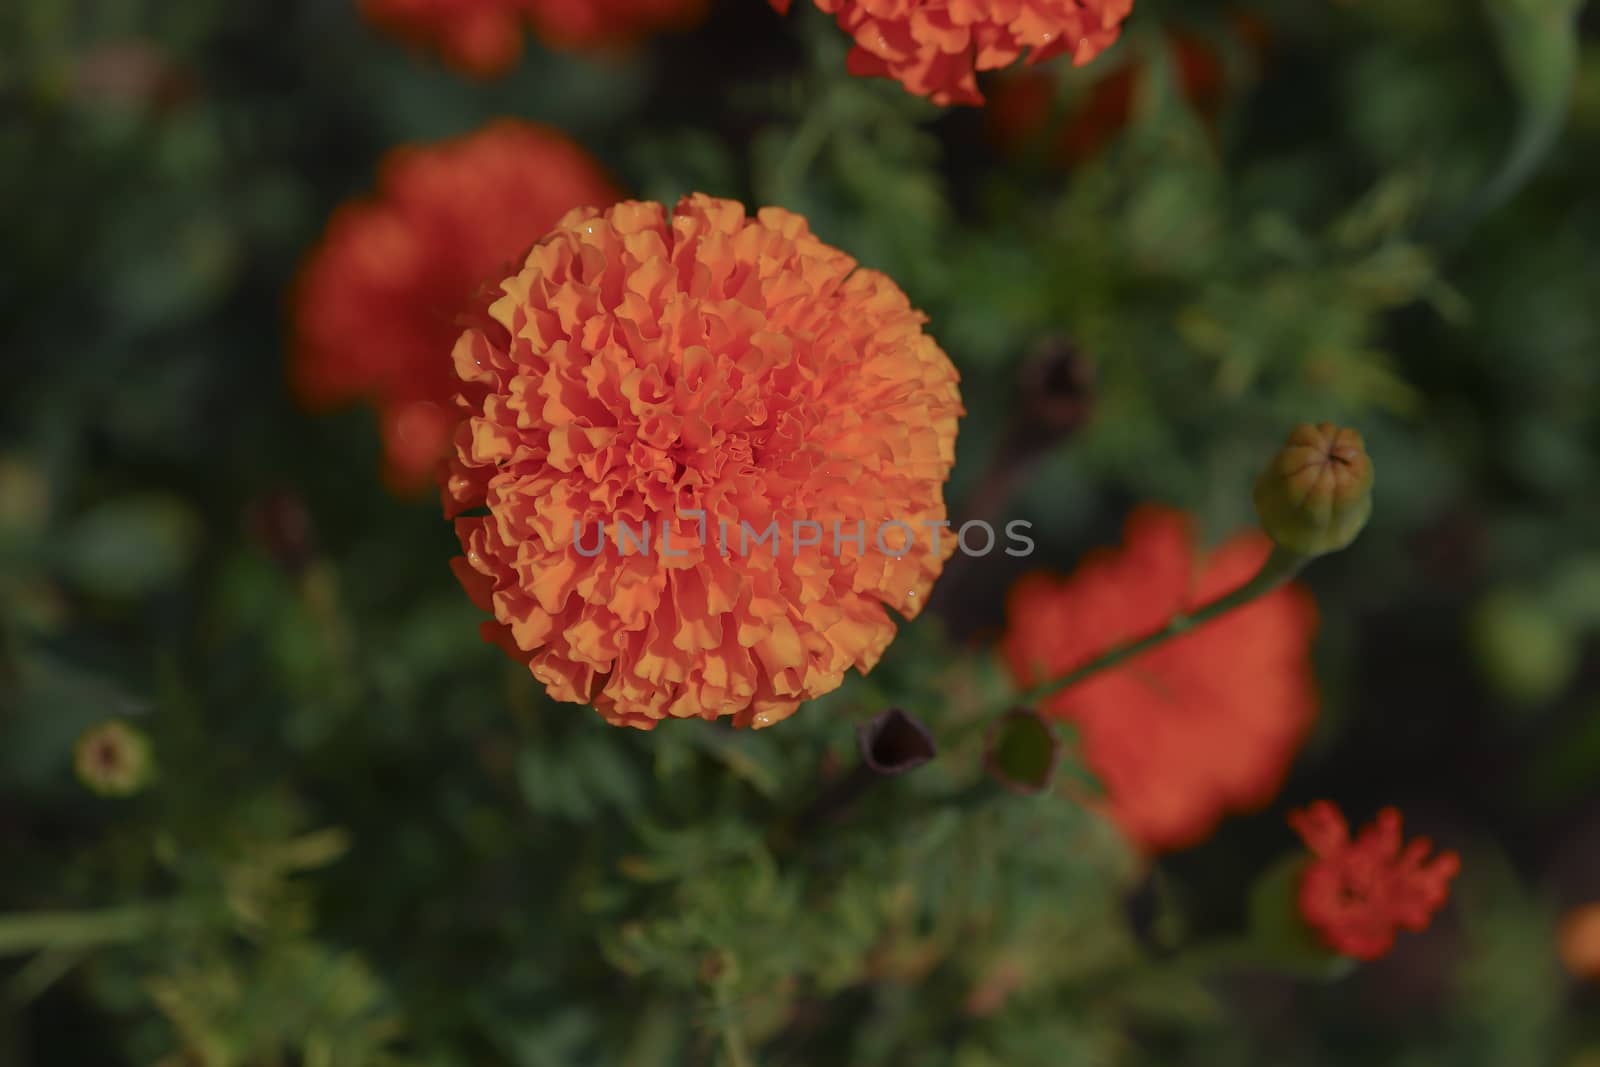 Indian marigold flowers by 9500102400